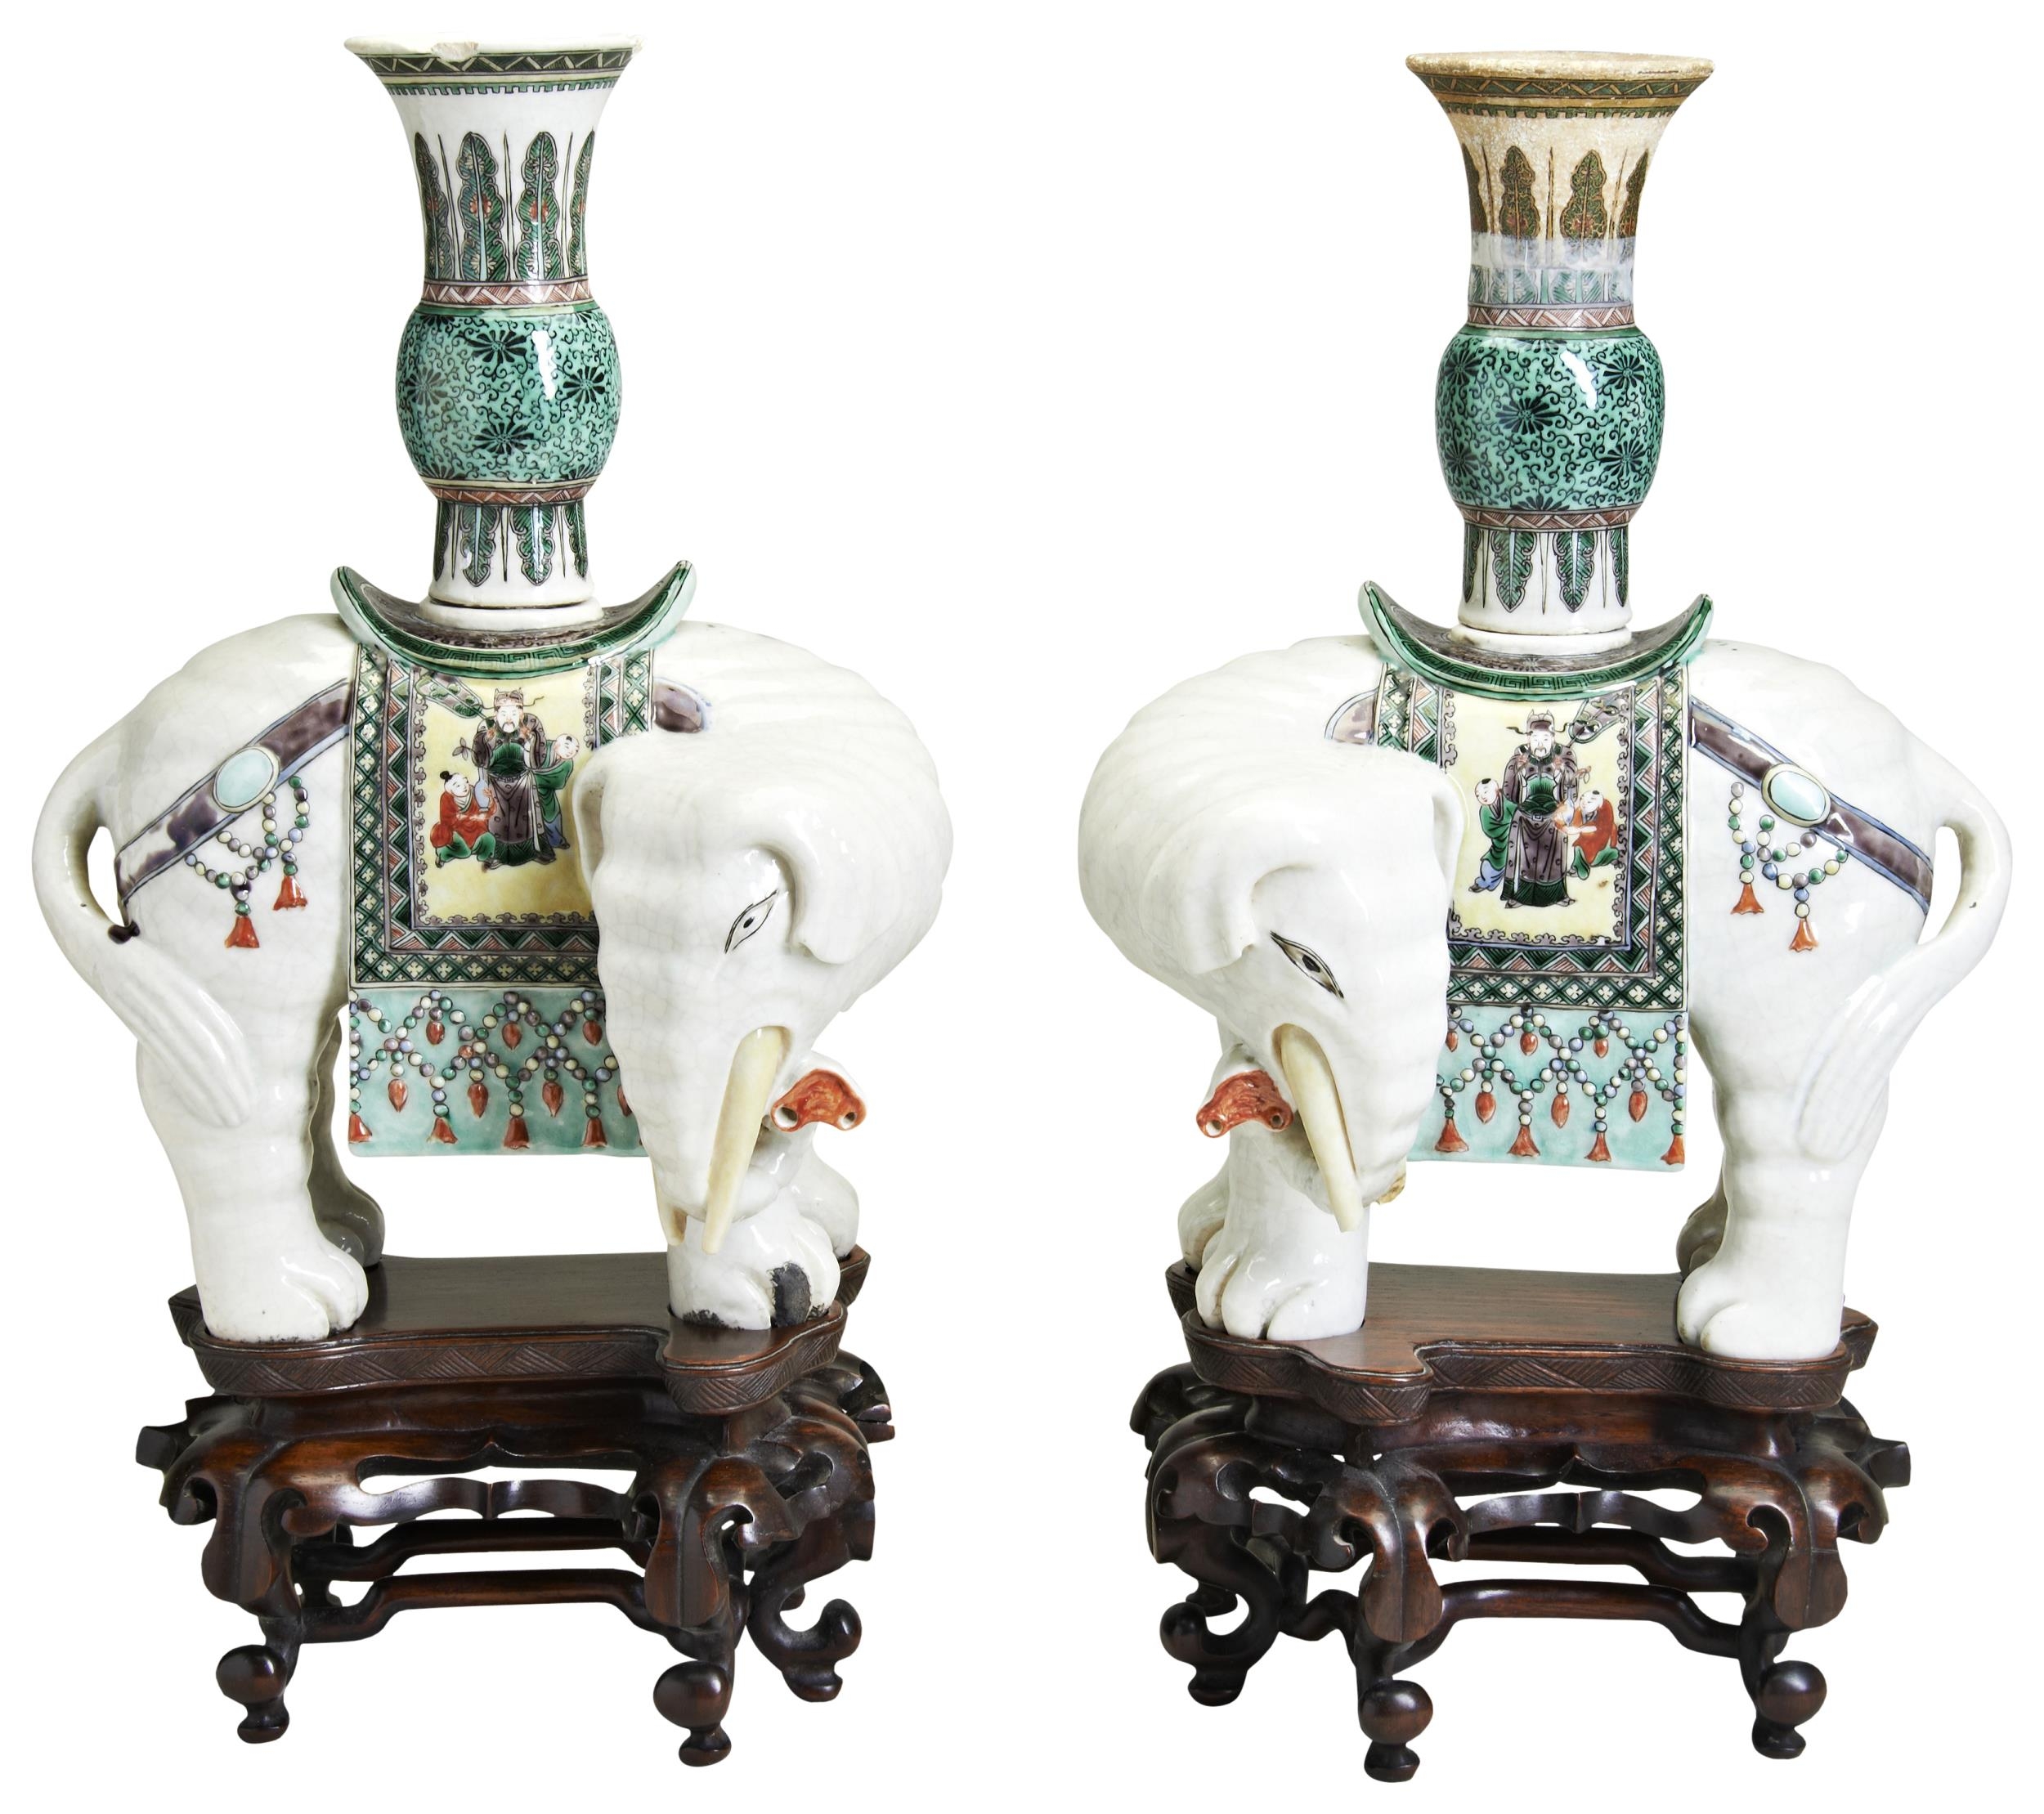 A PAIR OF FAMILLE VERTE AND WHITE-GLAZED ELEPHANT INCENSE BURNERS  LATE QING DYNASTY 清 太平有象摆件一对